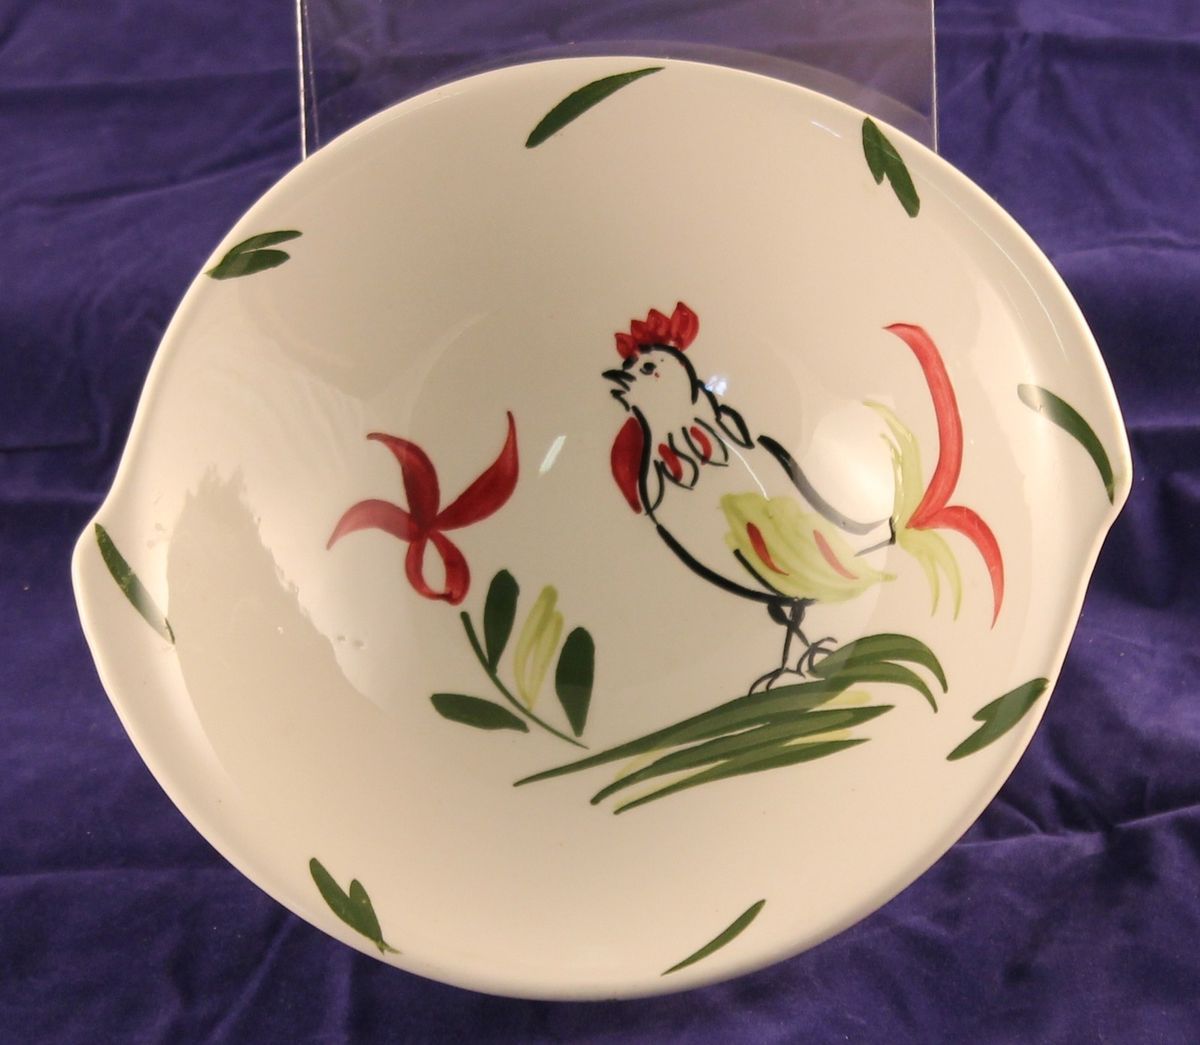 Blue Ridge Southern Pottery Chanticleer Rooster 9 Round Cereal Bowl 